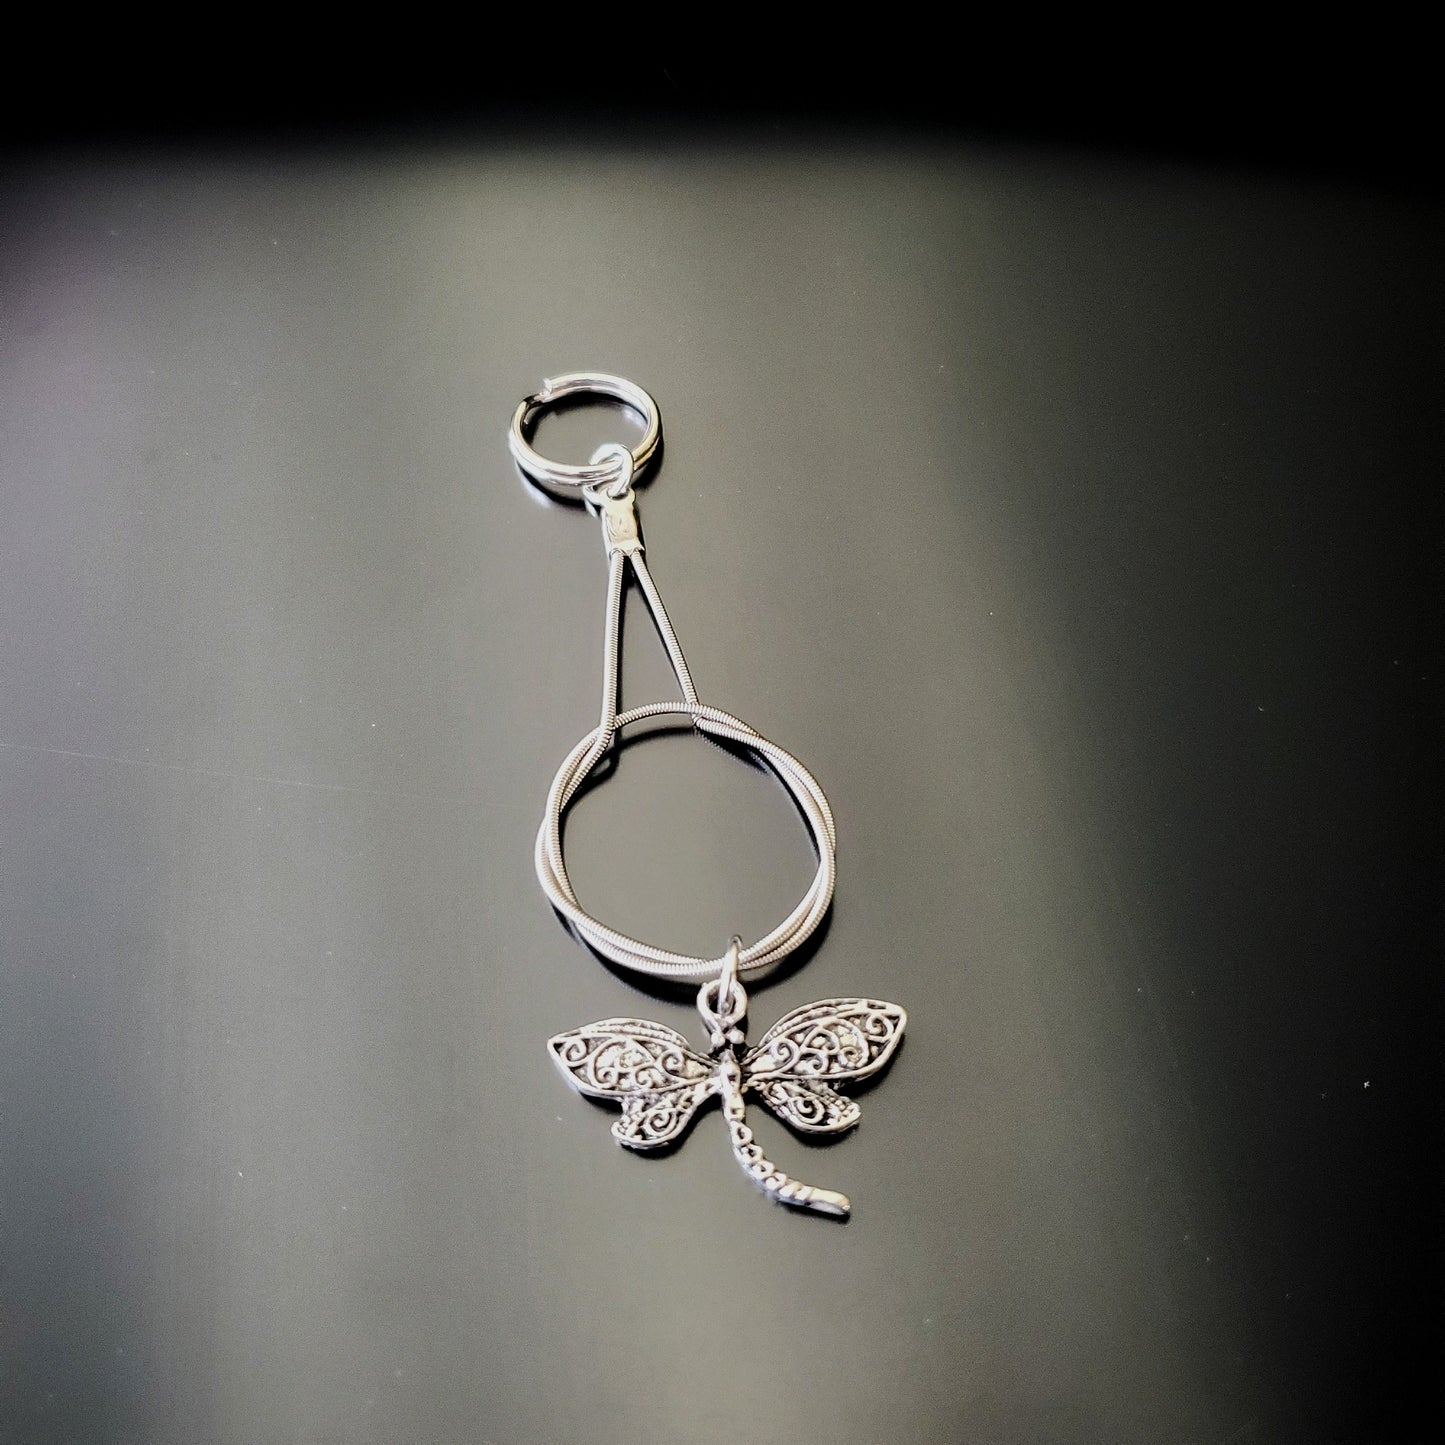 silver coloured keychain made from an upcycled guitar string on which hangs a silver coloured dragonfly pendant black and grey background